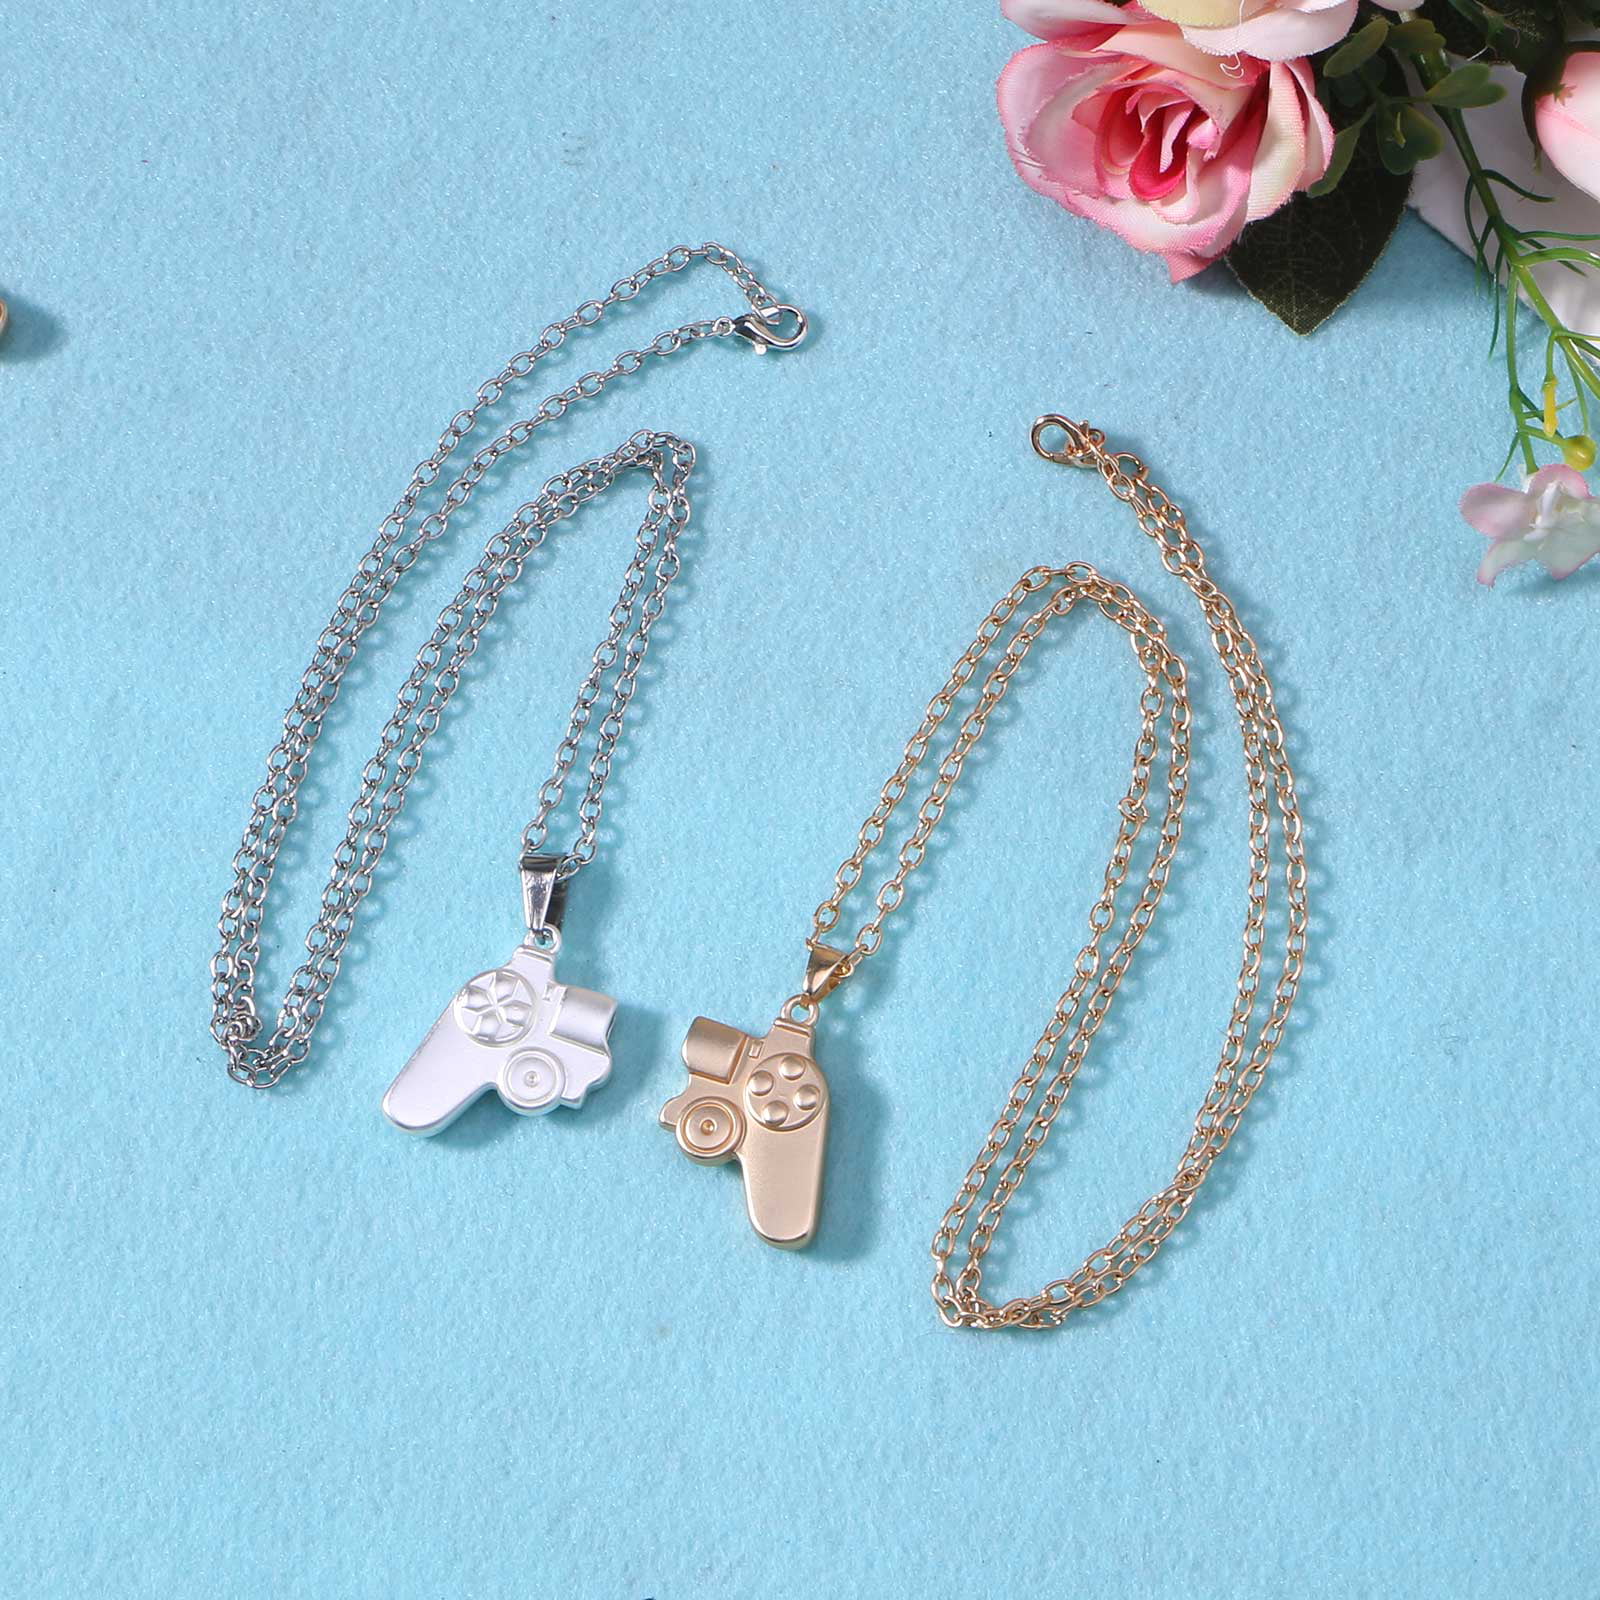 Best Friends Matching Necklaces – M&P Jewelry